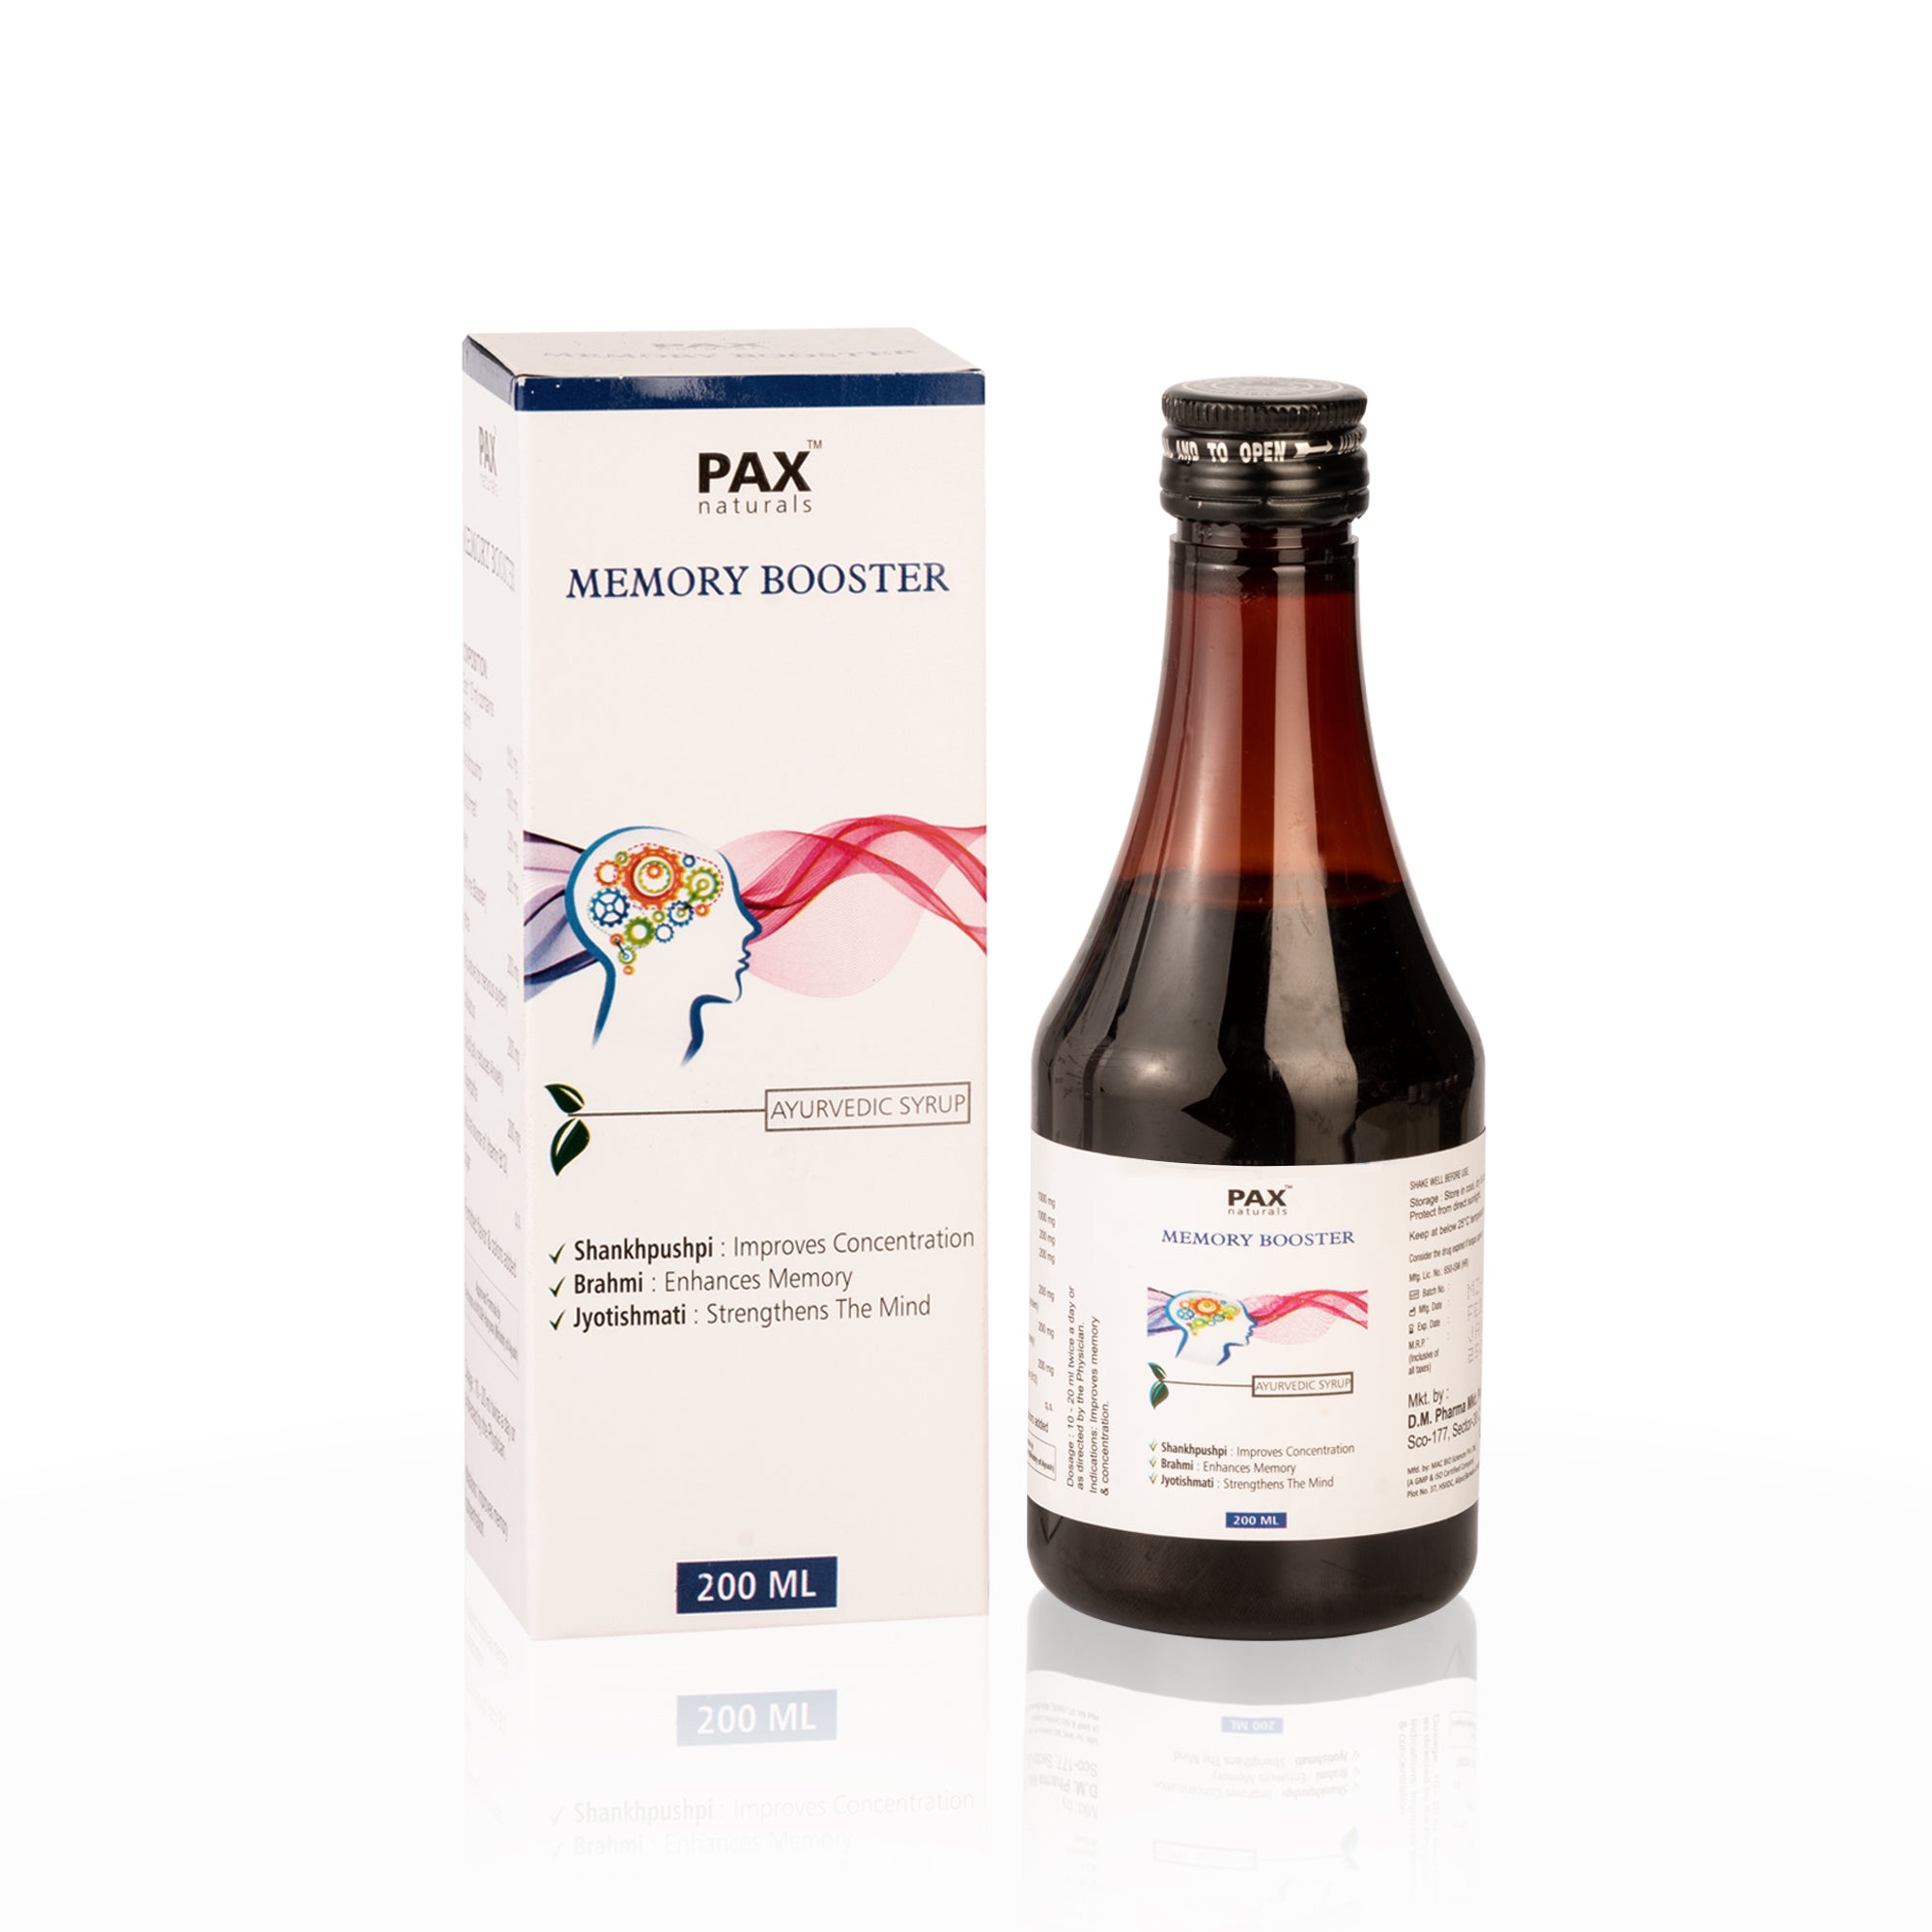 Pax Naturals Memory Booster-200 ML syrup